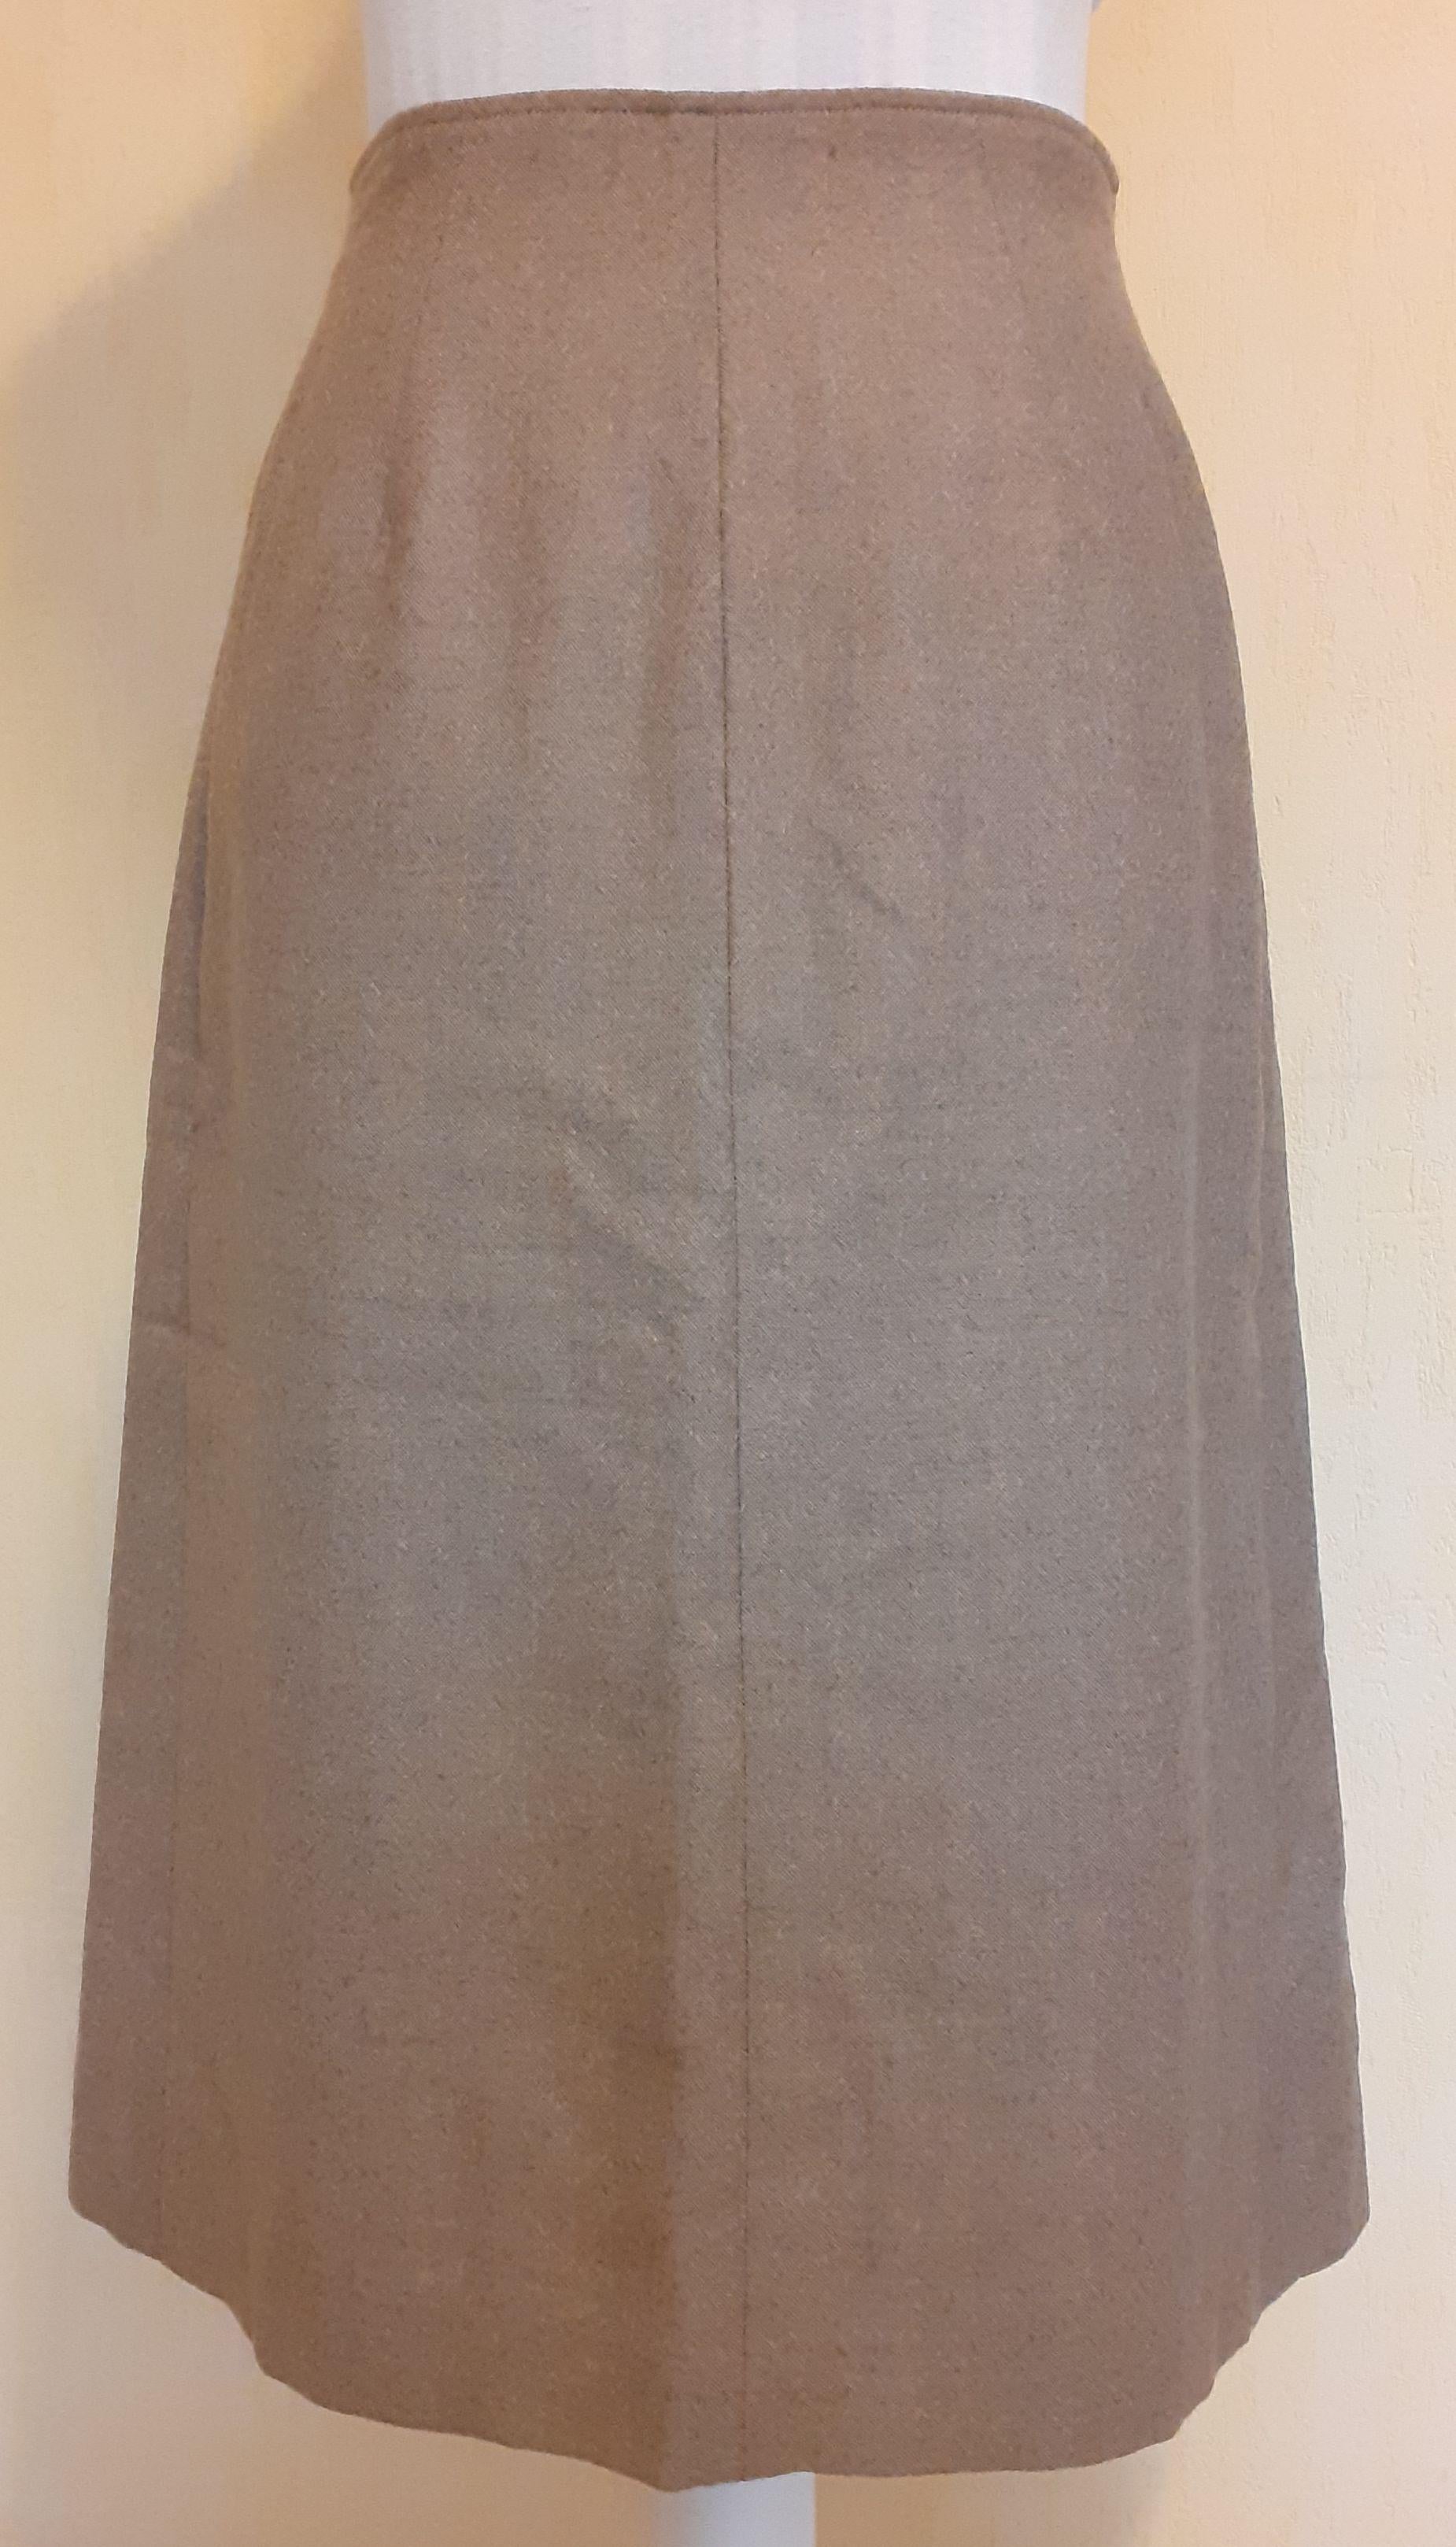 Hermès Wrap Skirt in Woll and Cashmere Size 36 Small For Sale 1